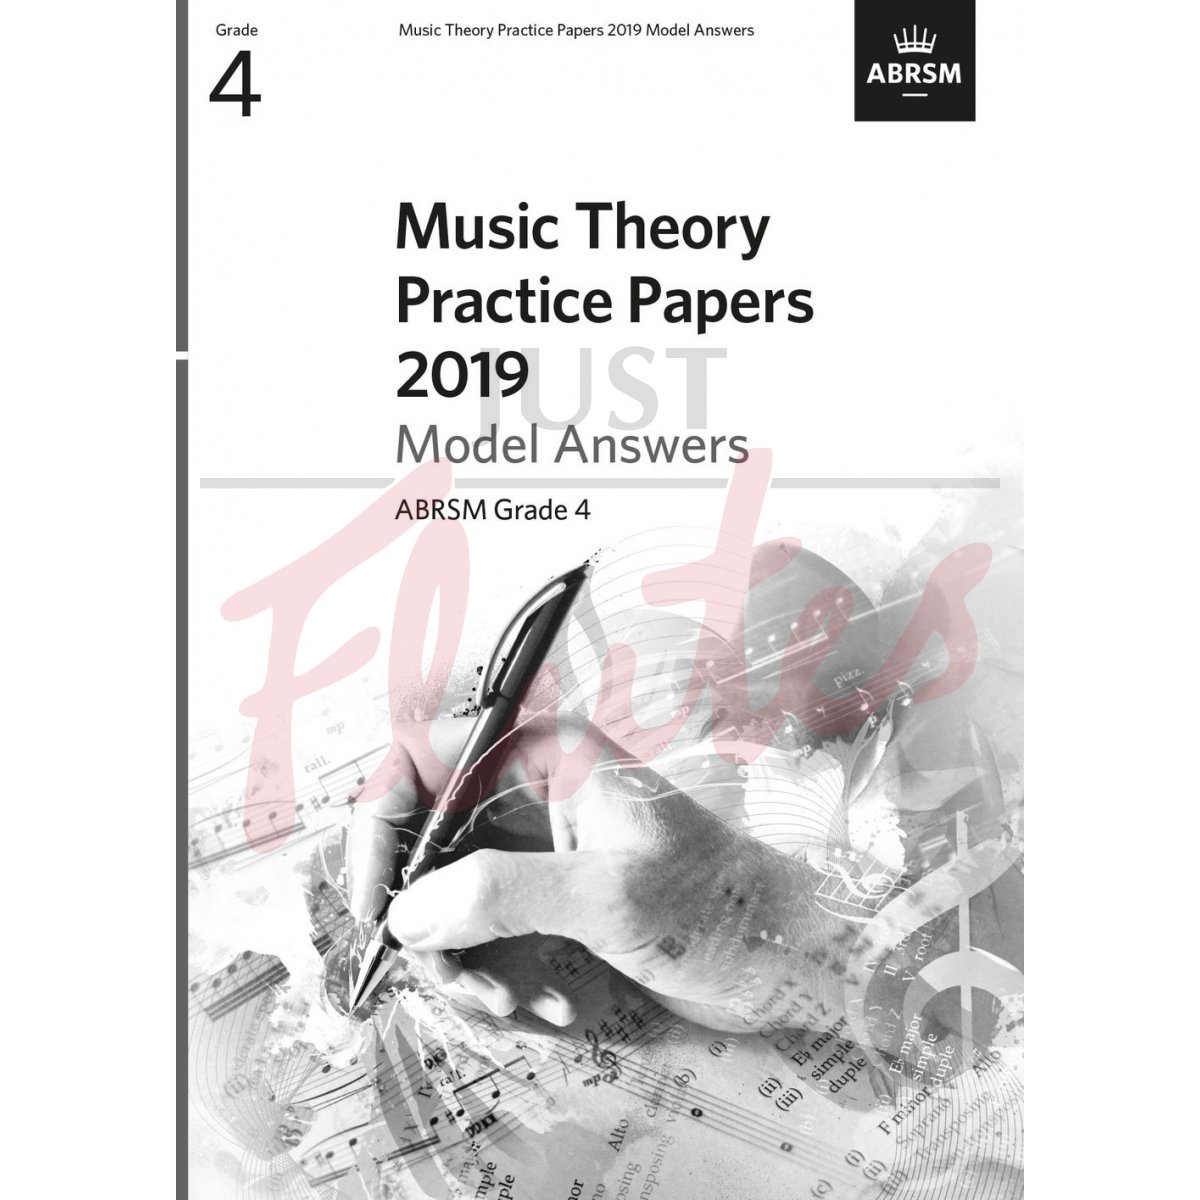 Music Theory Practice Papers 2019 Grade 4 - Model Answers